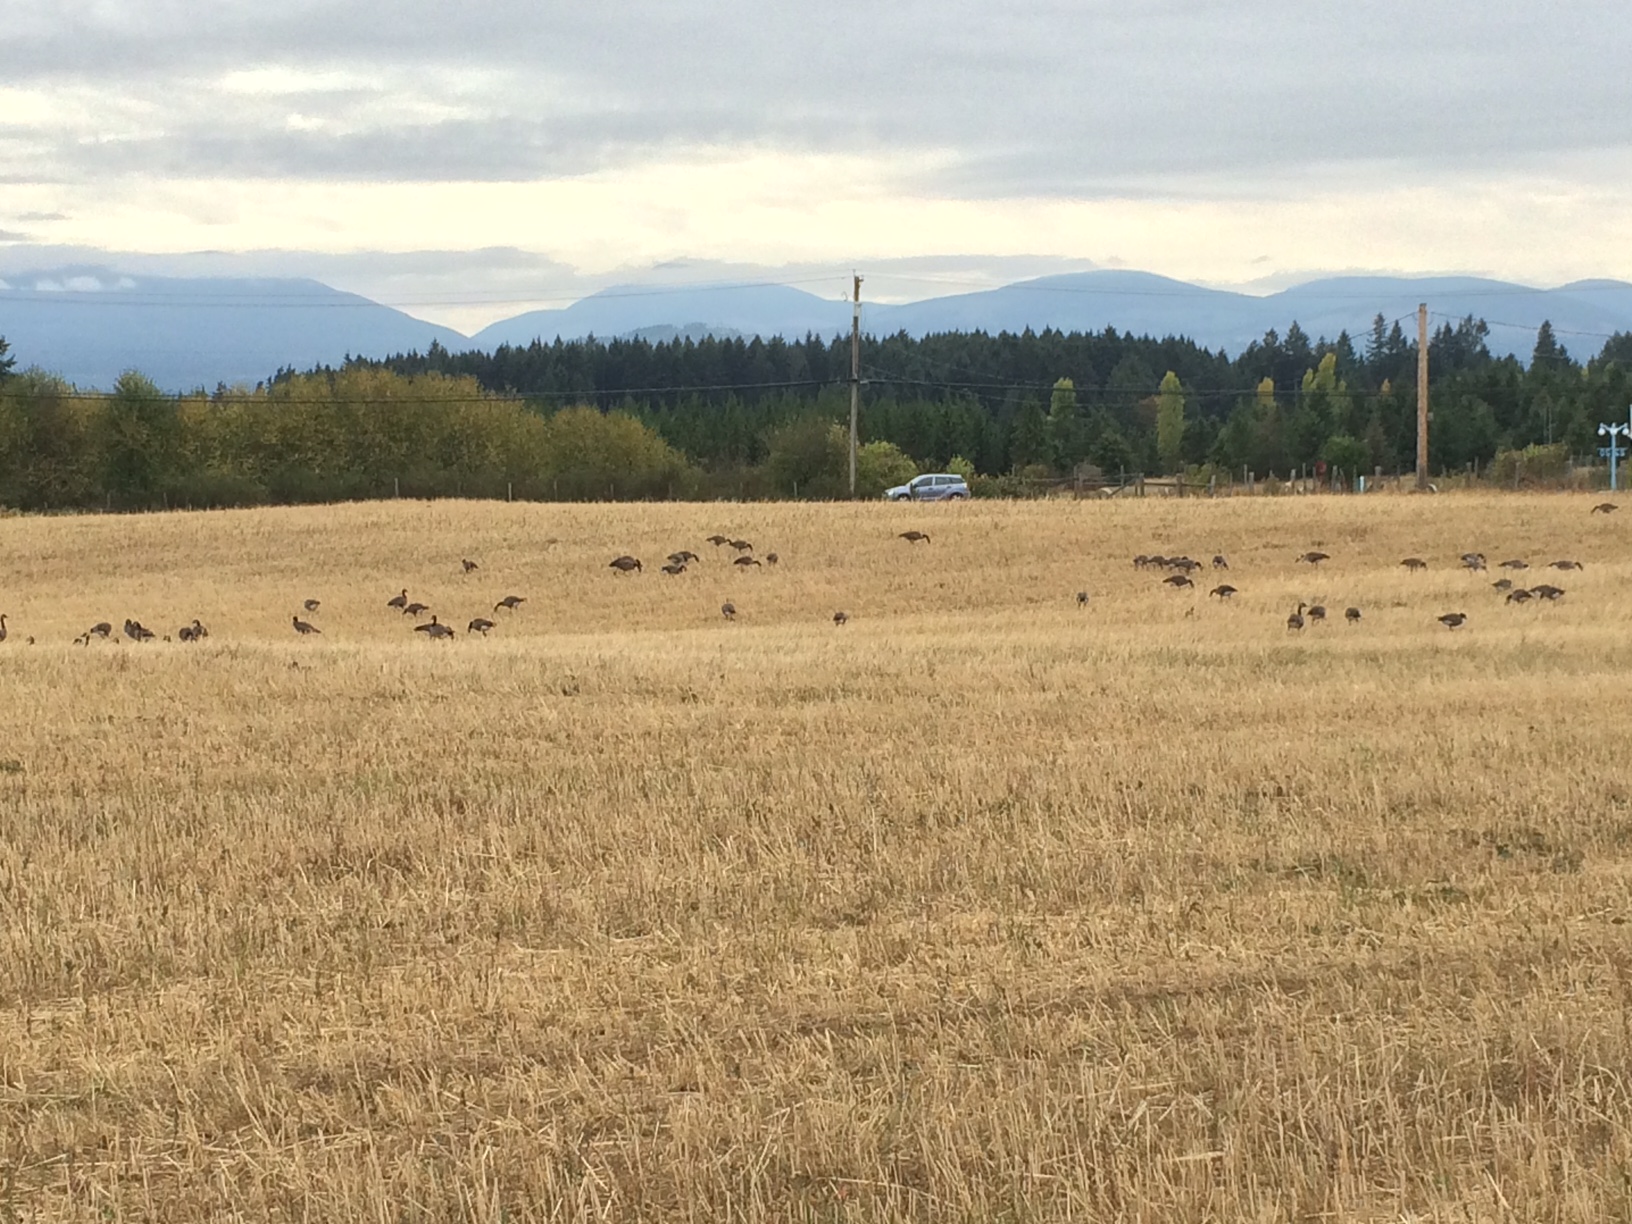 This grain field near the Crow & Gate Pub in Cedar was a big attractant for geese, with numbers exceeding 350 at times - Stew Pearce photo